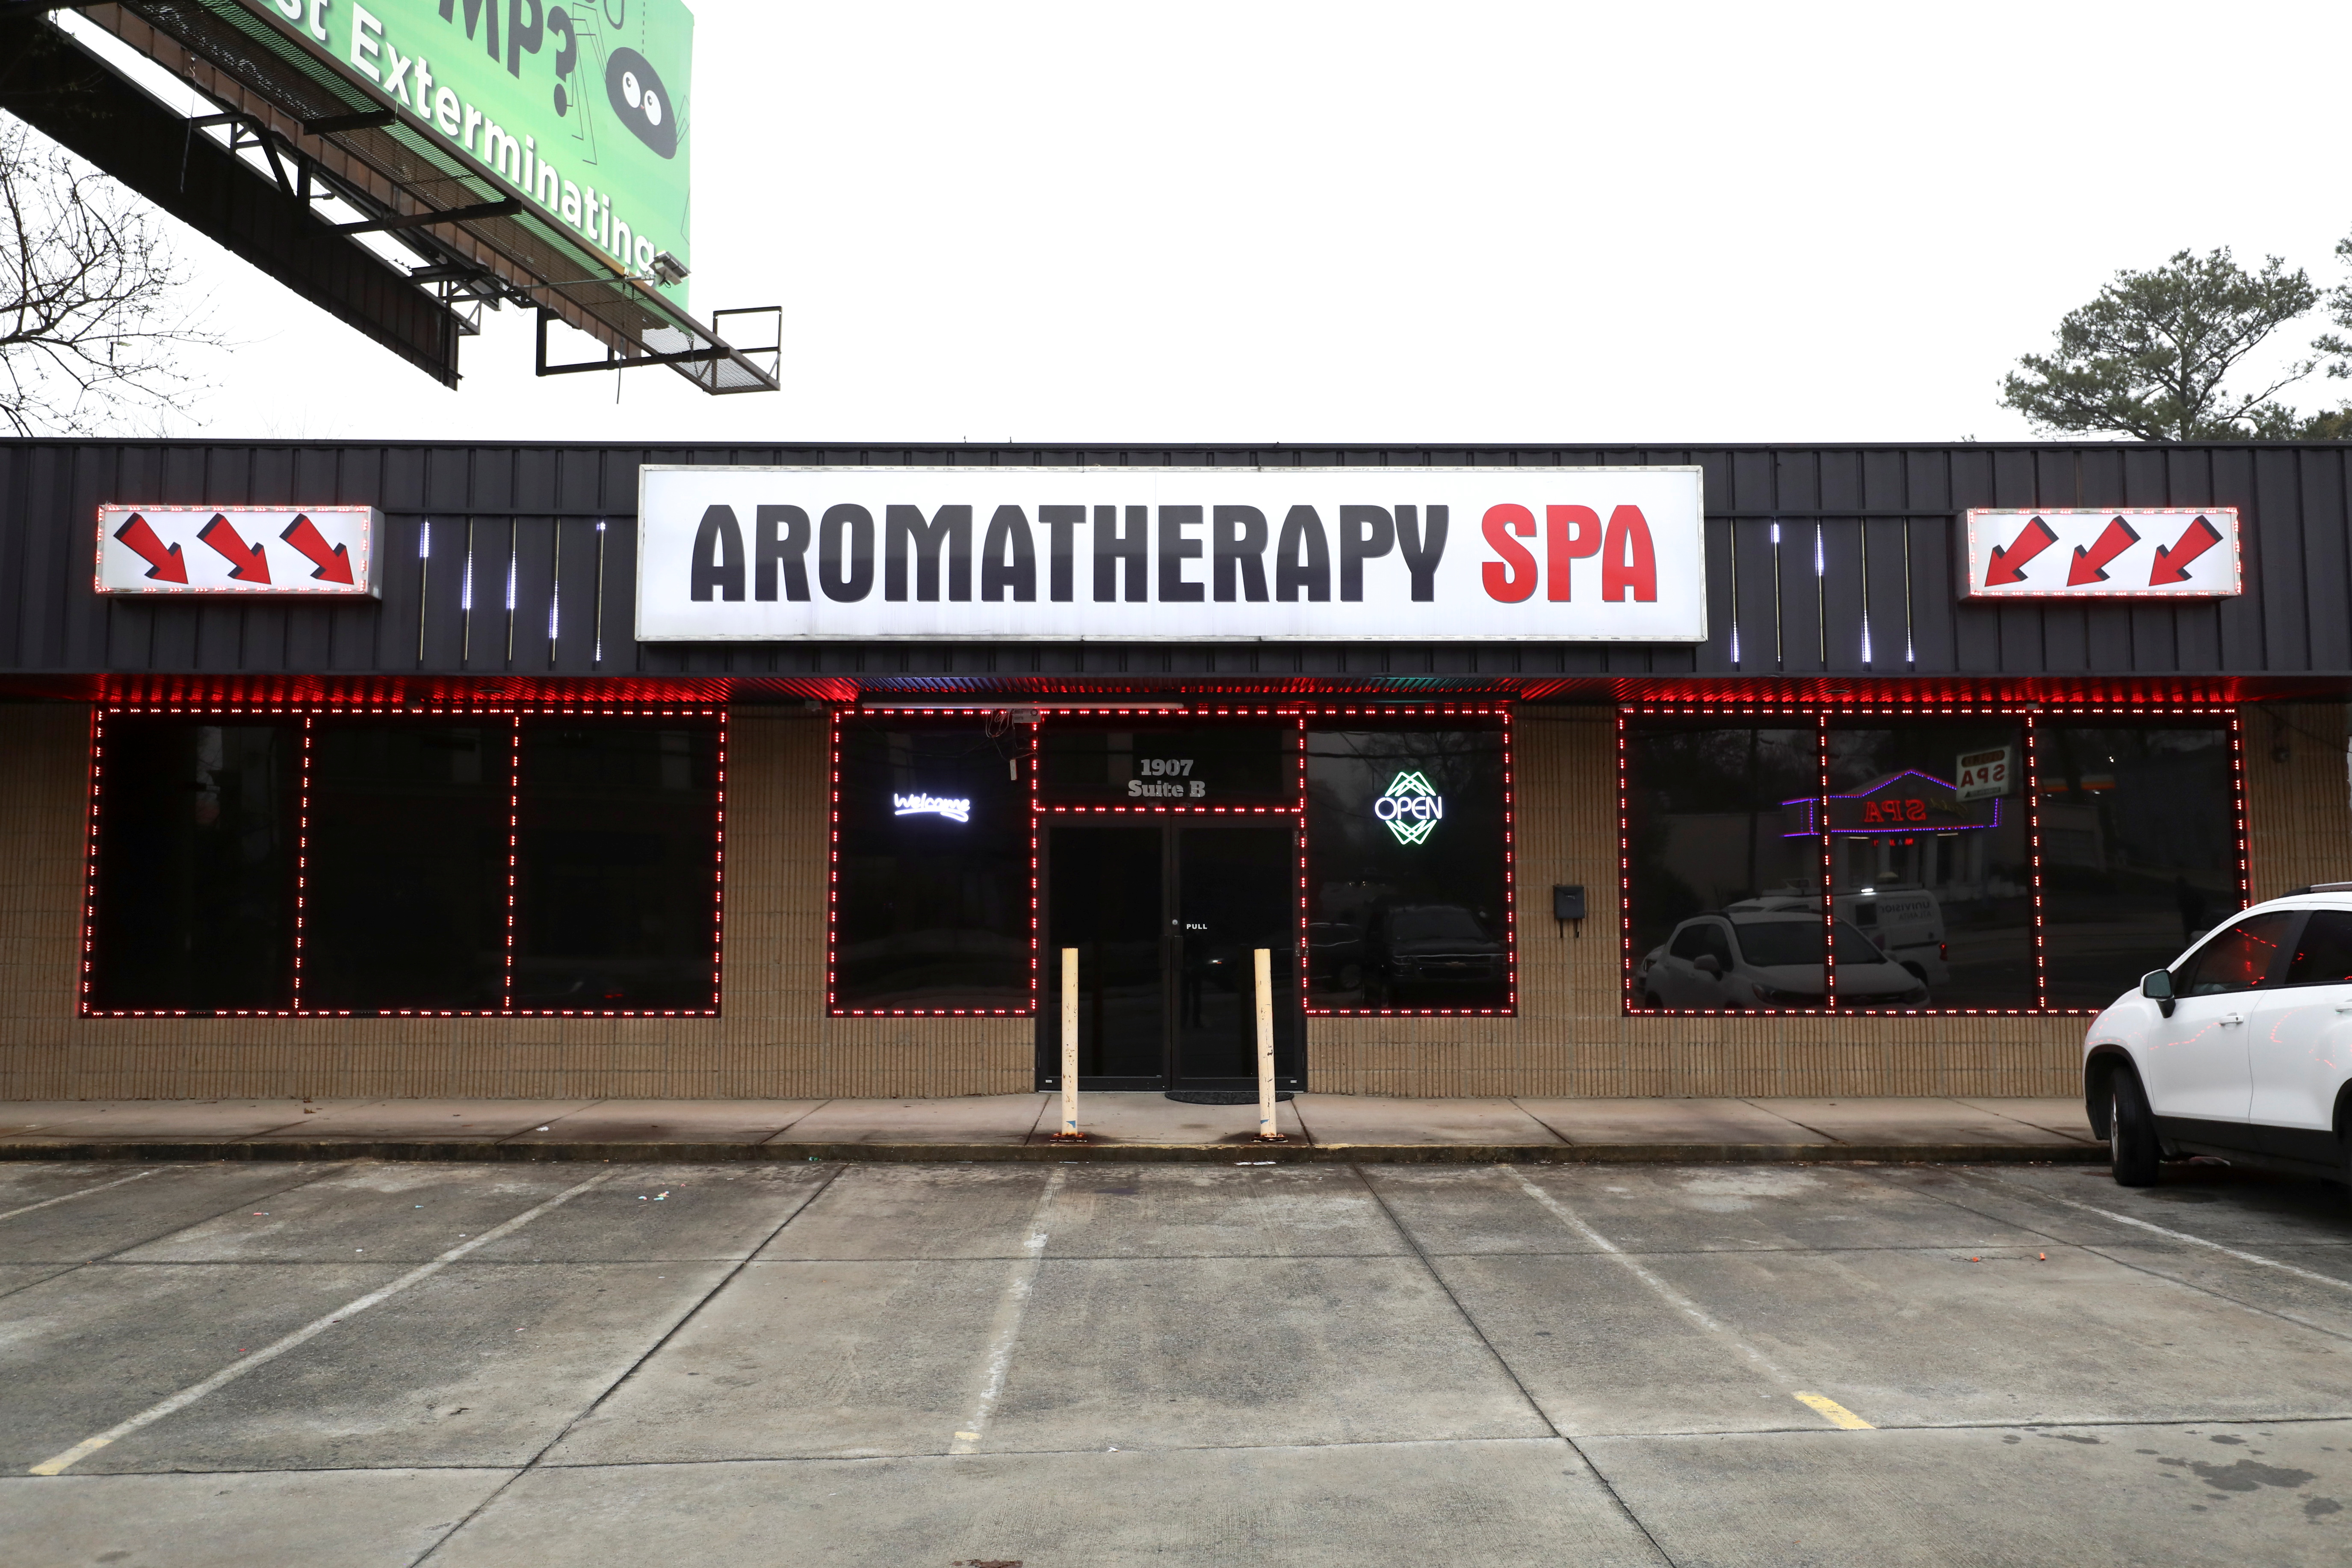 A view of the Aromatherapy Spa after deadly shootings at three day spas, in Atlanta